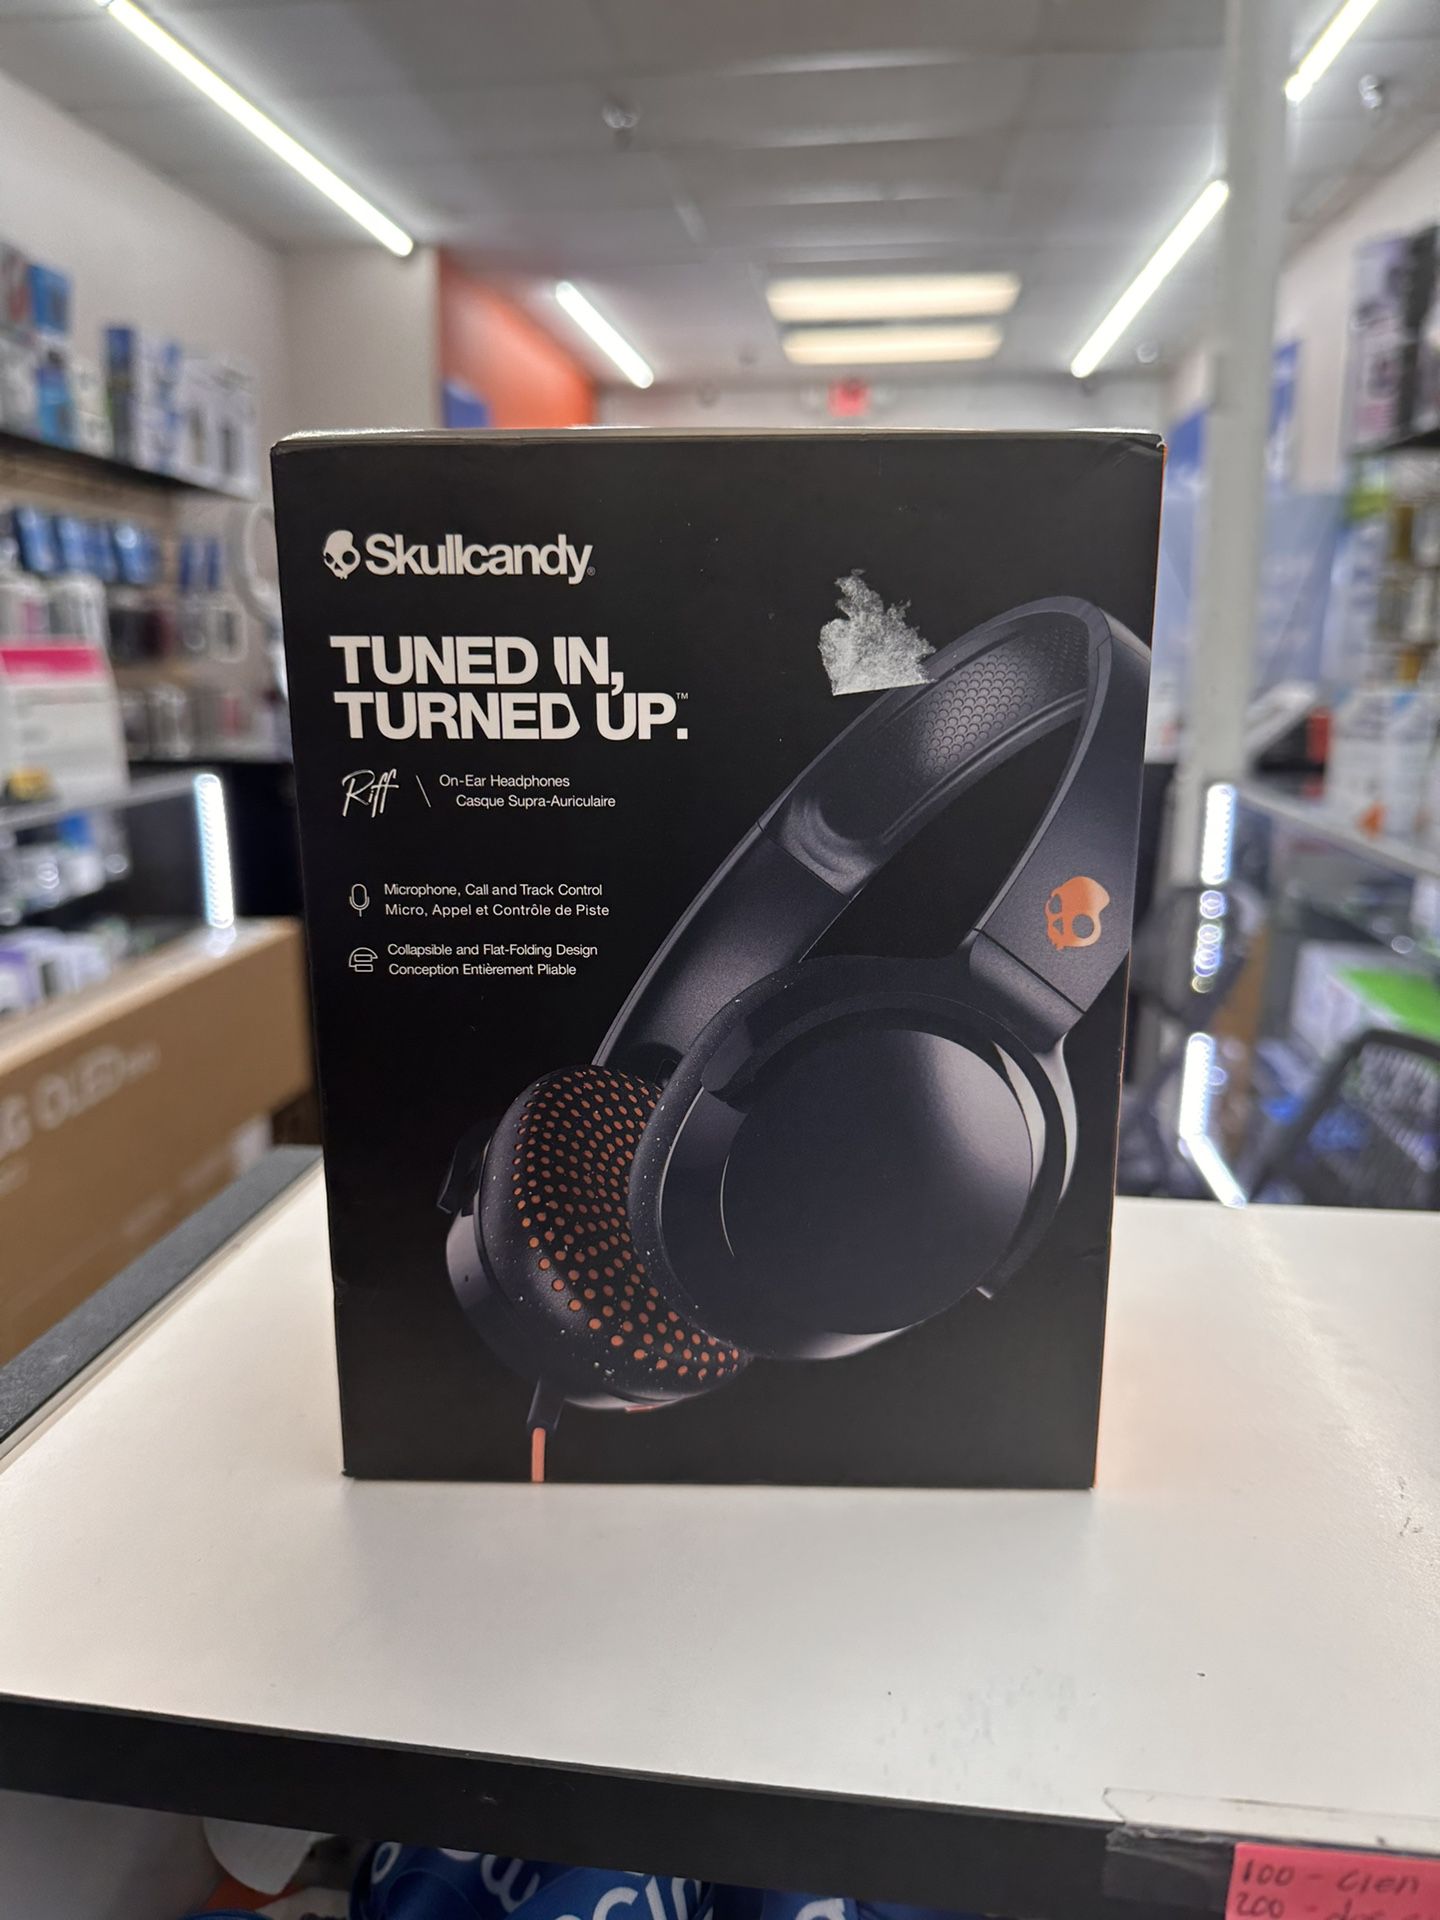 %Skullcandy. TUNED IN. TURNED UP. On-Ear Headphones Casque Supra-Auriculaire